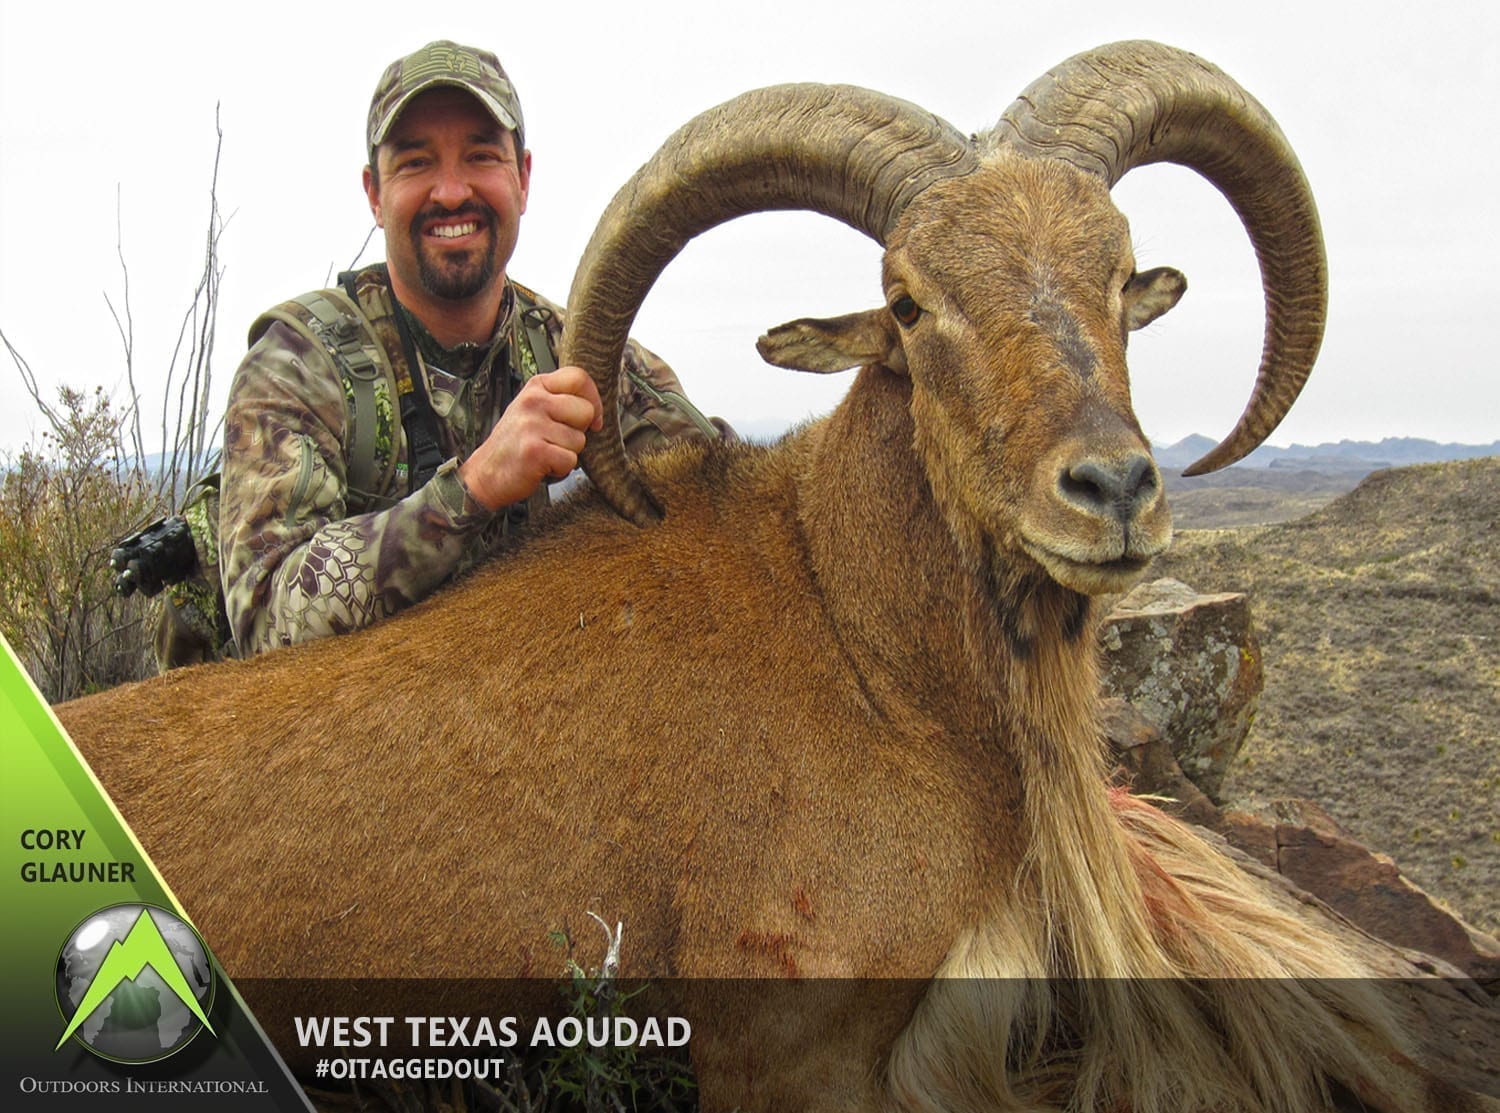 On the first day, Cory got on the board early with a great 31 1/2″ ram.